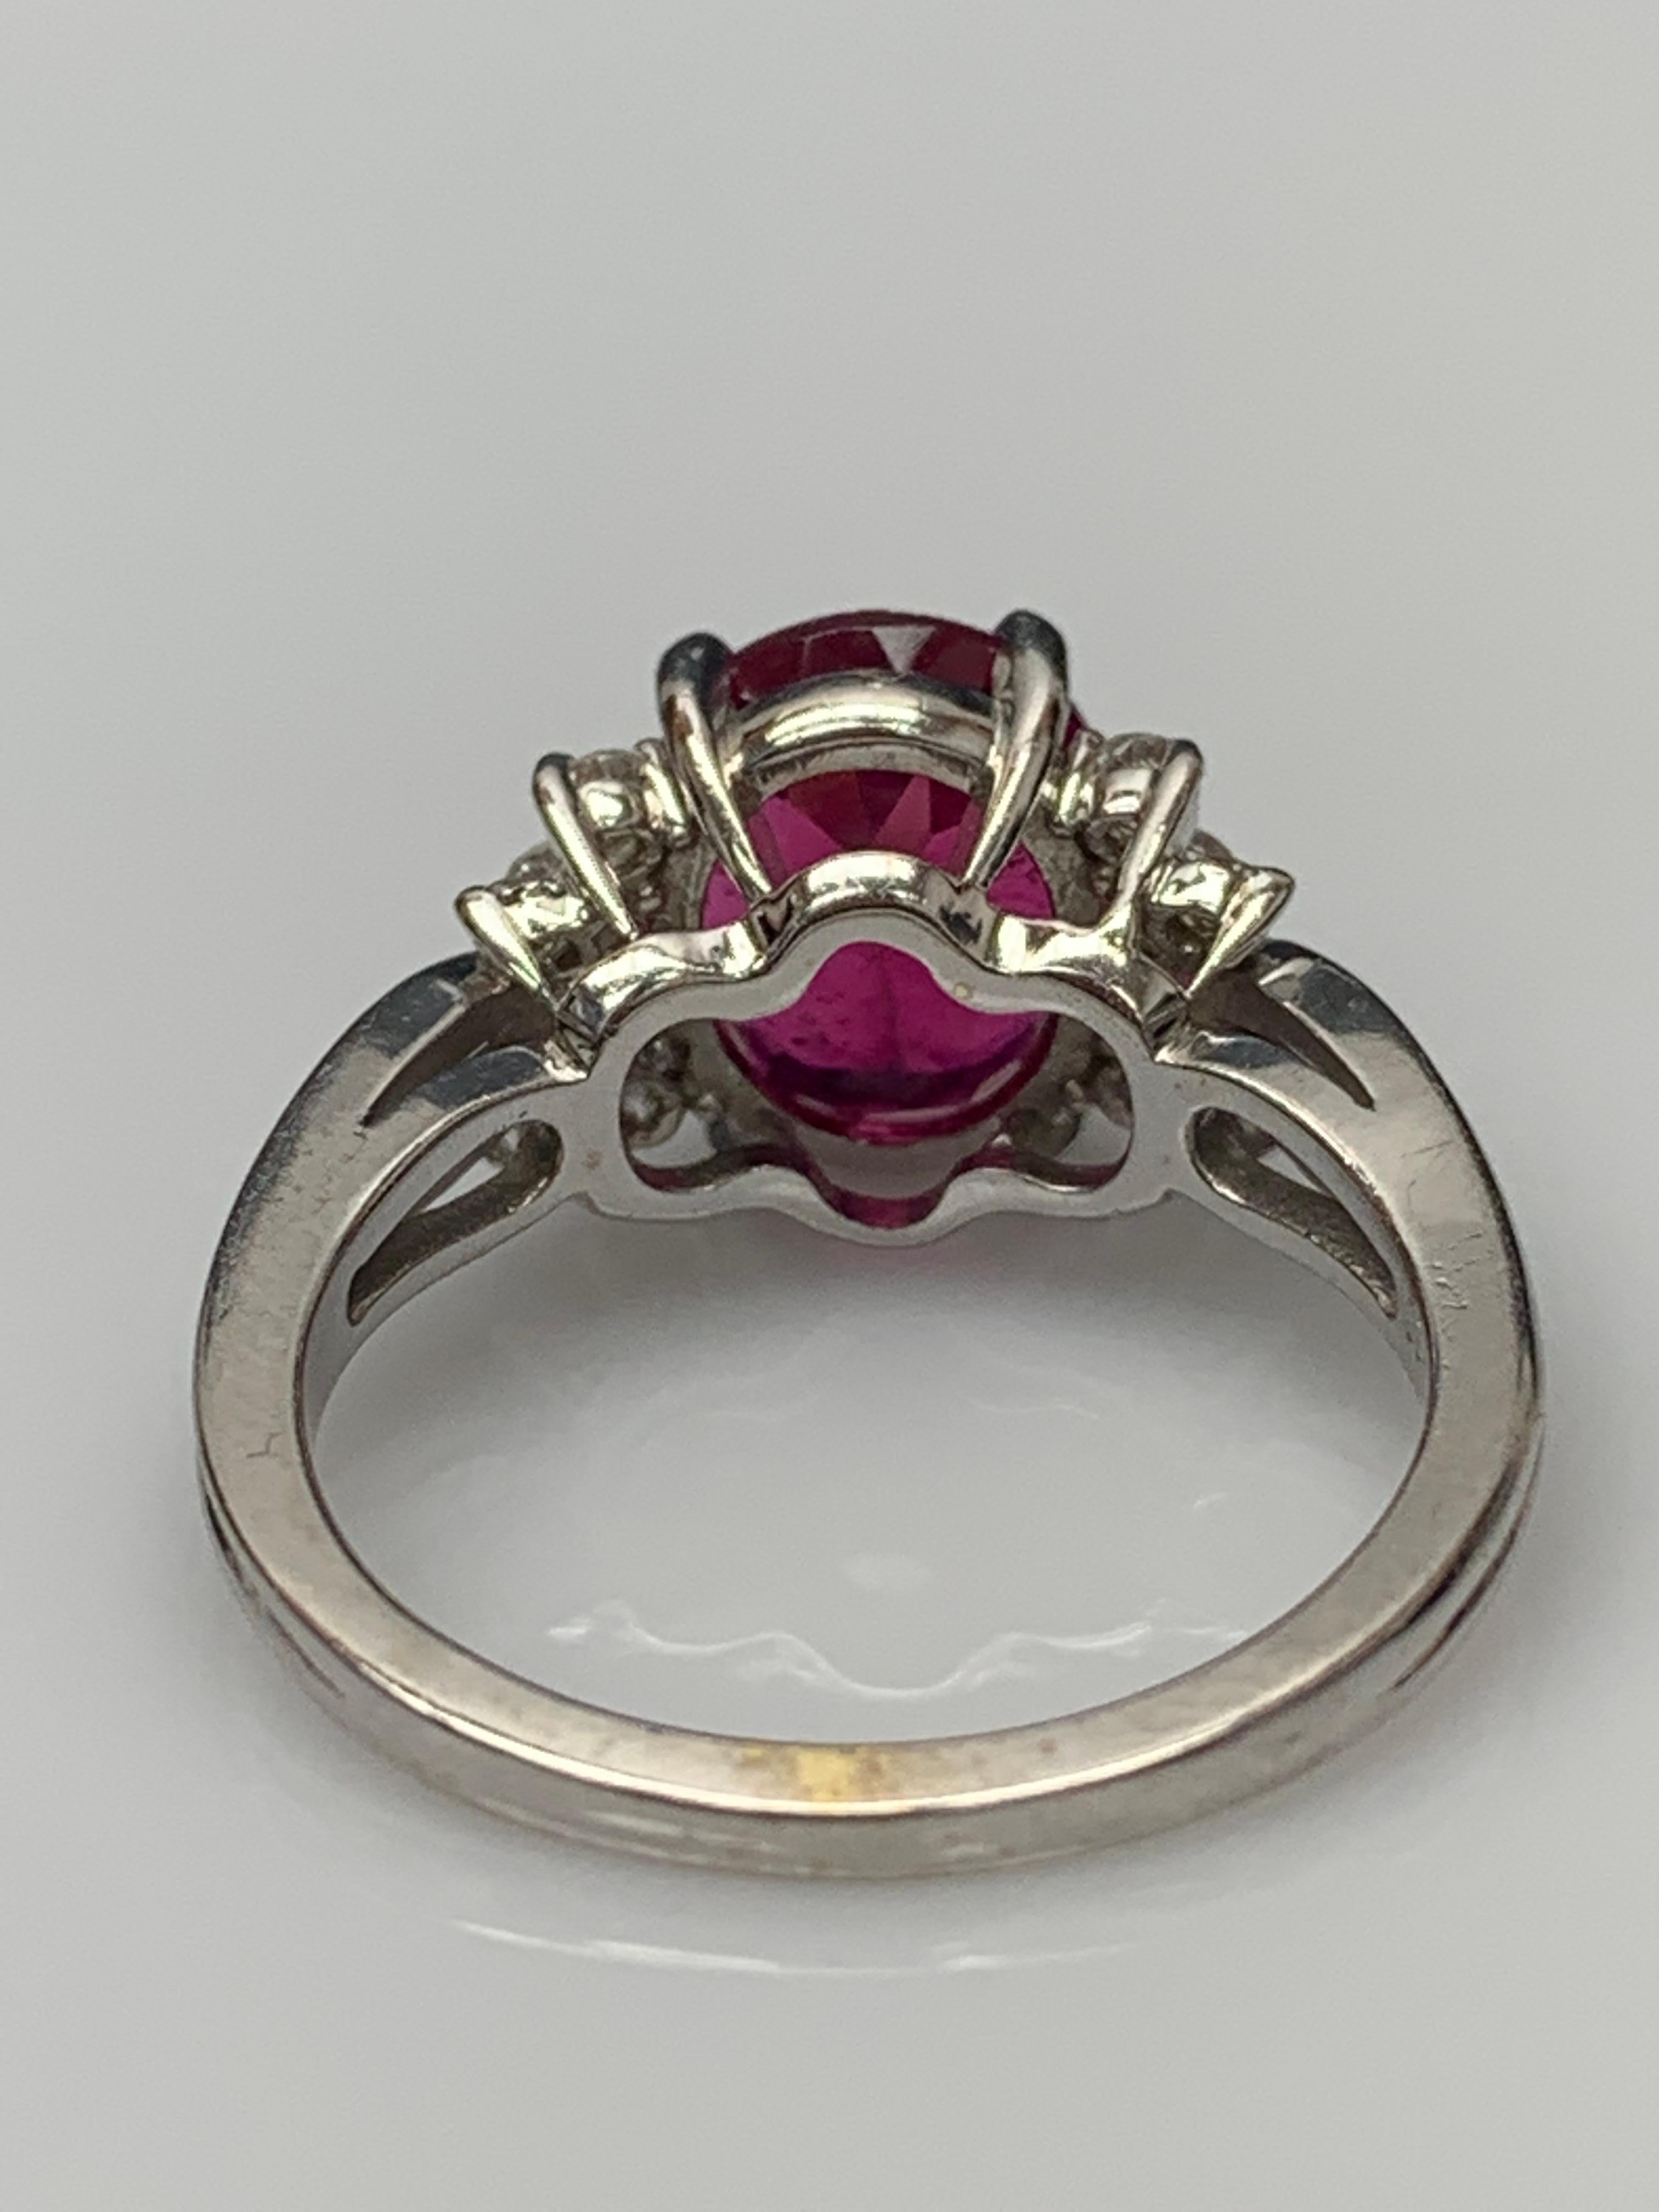 2.80 Carat Oval Cut Pink Tourmaline and Diamond Ring in 18K White Gold For Sale 11